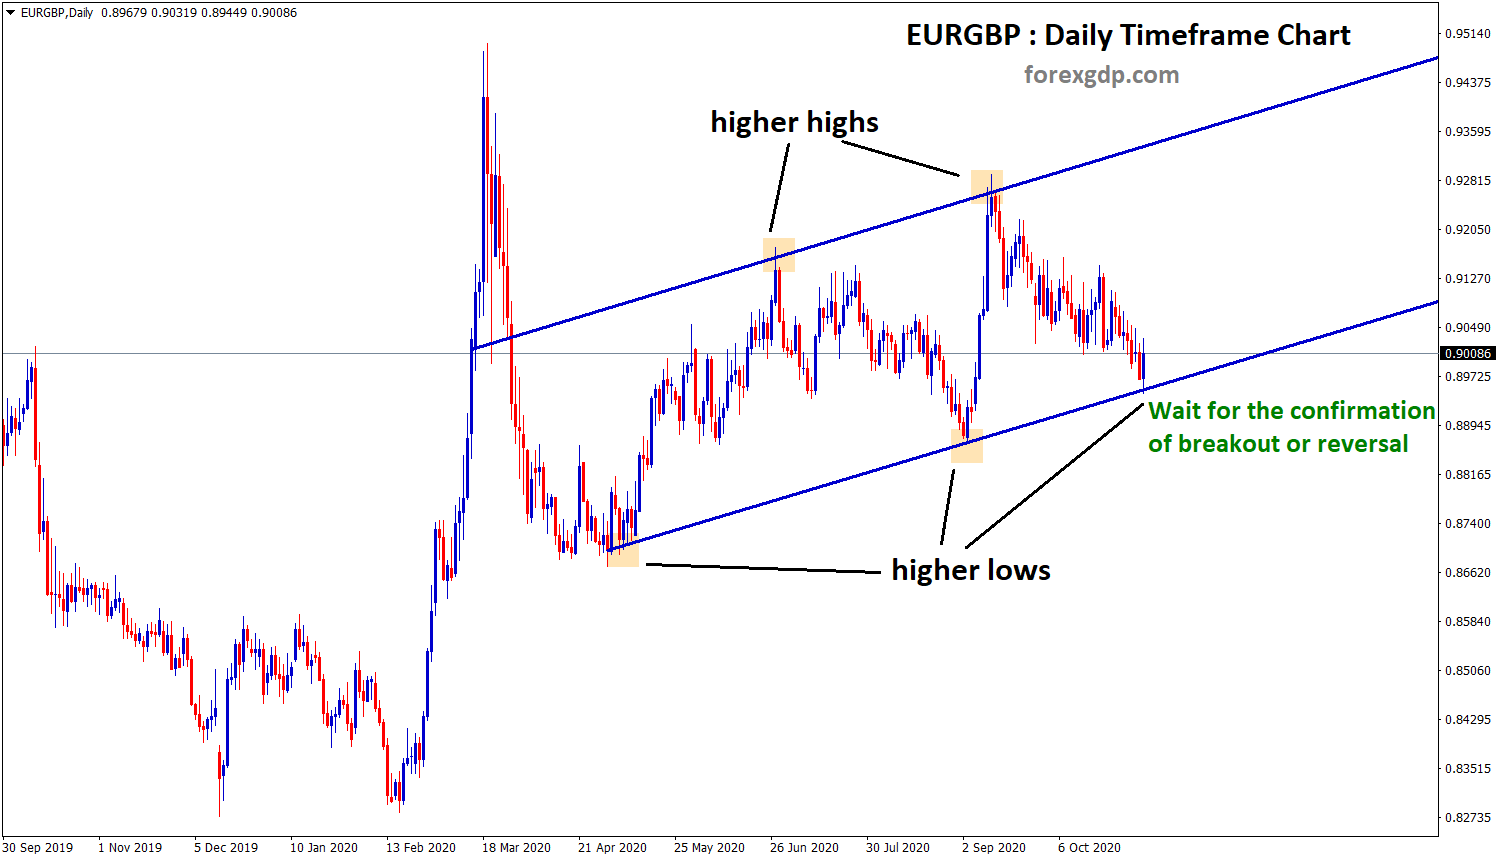 eurgbp higher low level wait for breakout or reversal